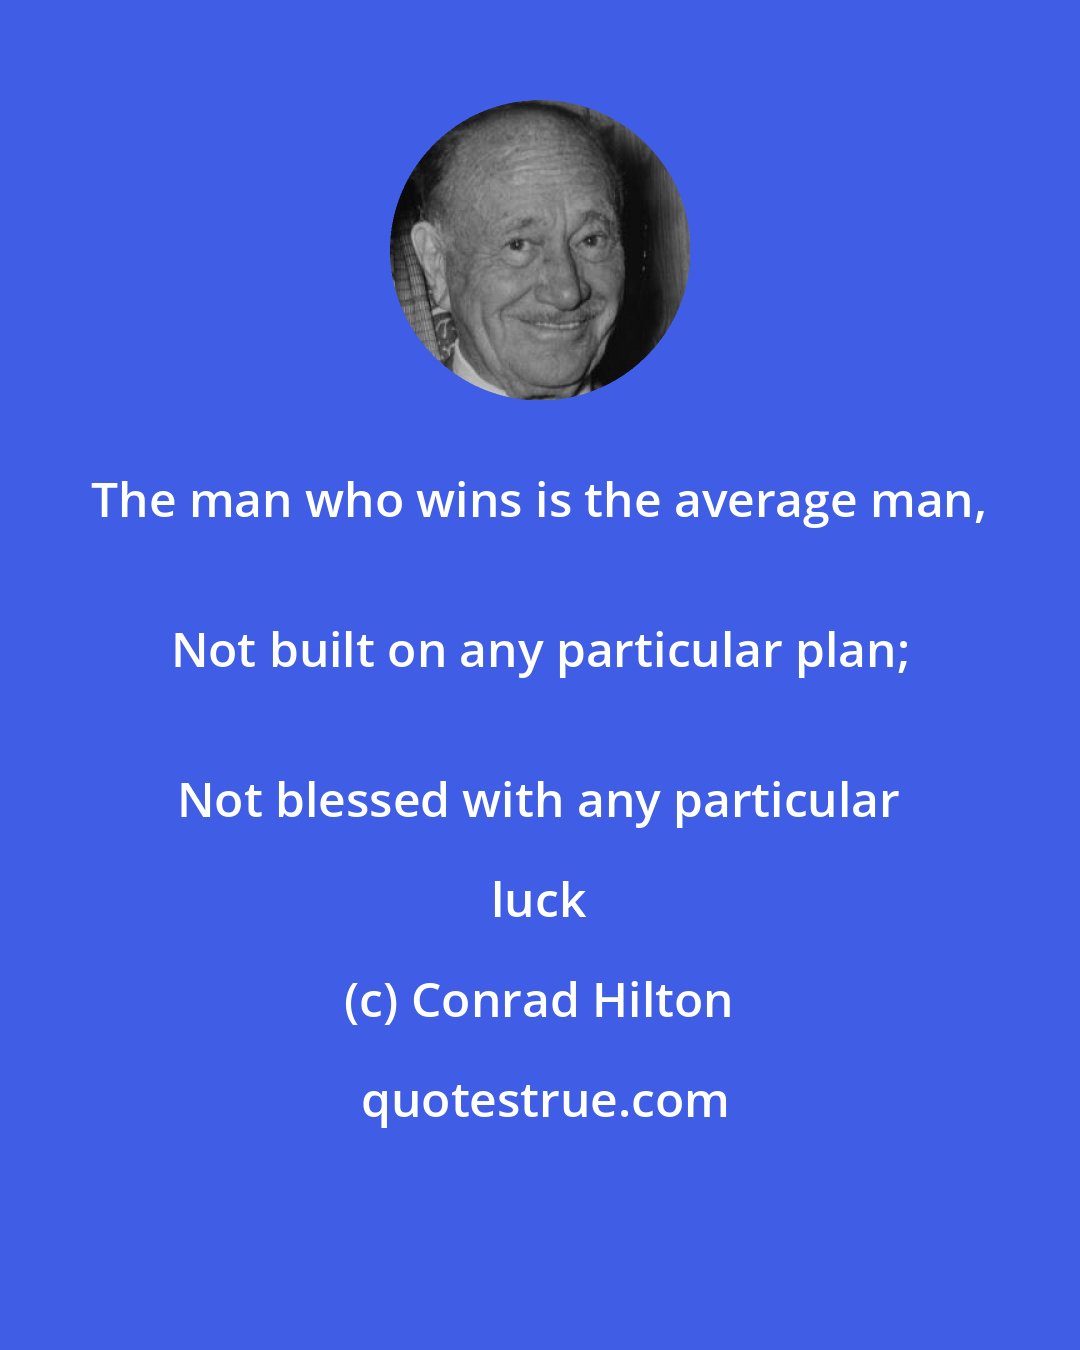 Conrad Hilton: The man who wins is the average man, 
Not built on any particular plan;
 Not blessed with any particular luck